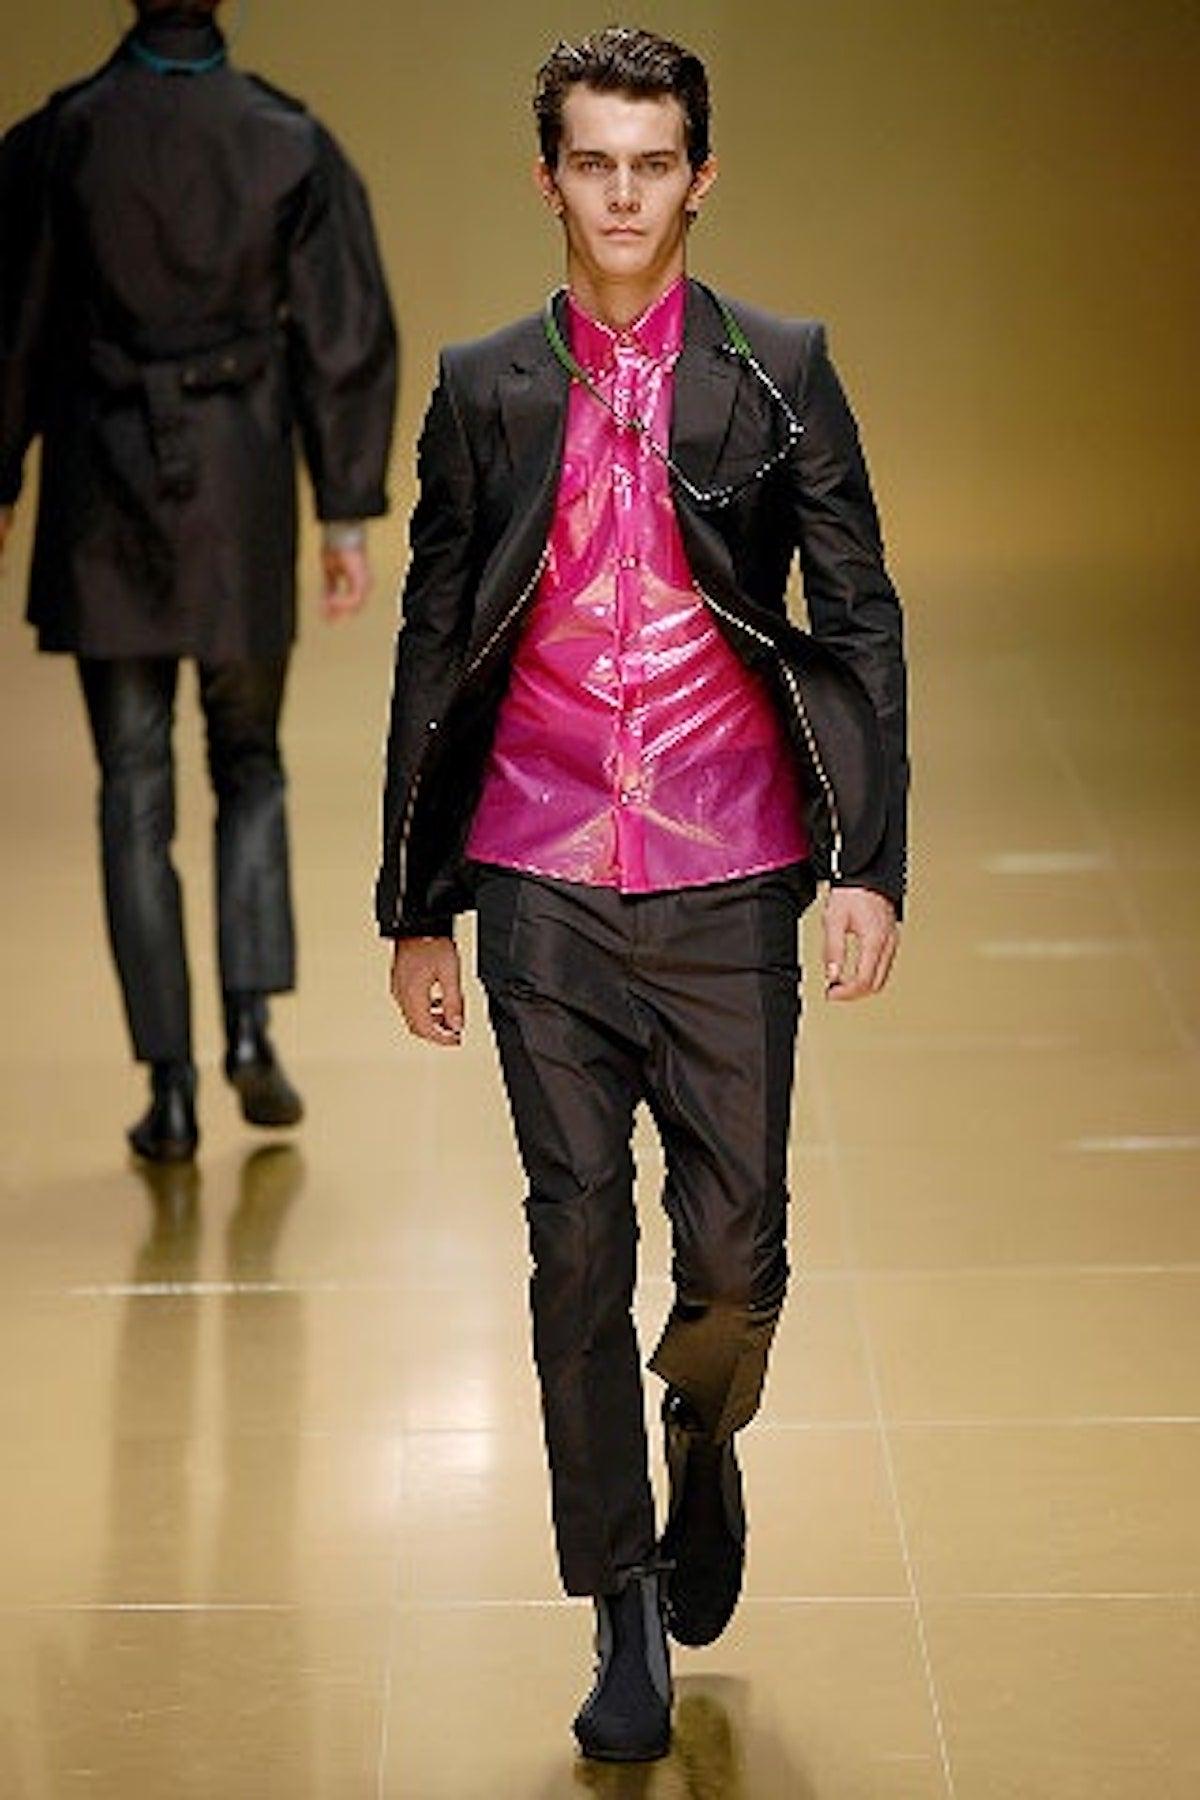 Men's early Burberry Prorsum by Christopher Bailey striped satin plum two-piece suit from the Spring 2008 menswear collection. Jacket features notched lapels, slit pocket at chest, dual flap pockets at waist, double vent at back, woven lining